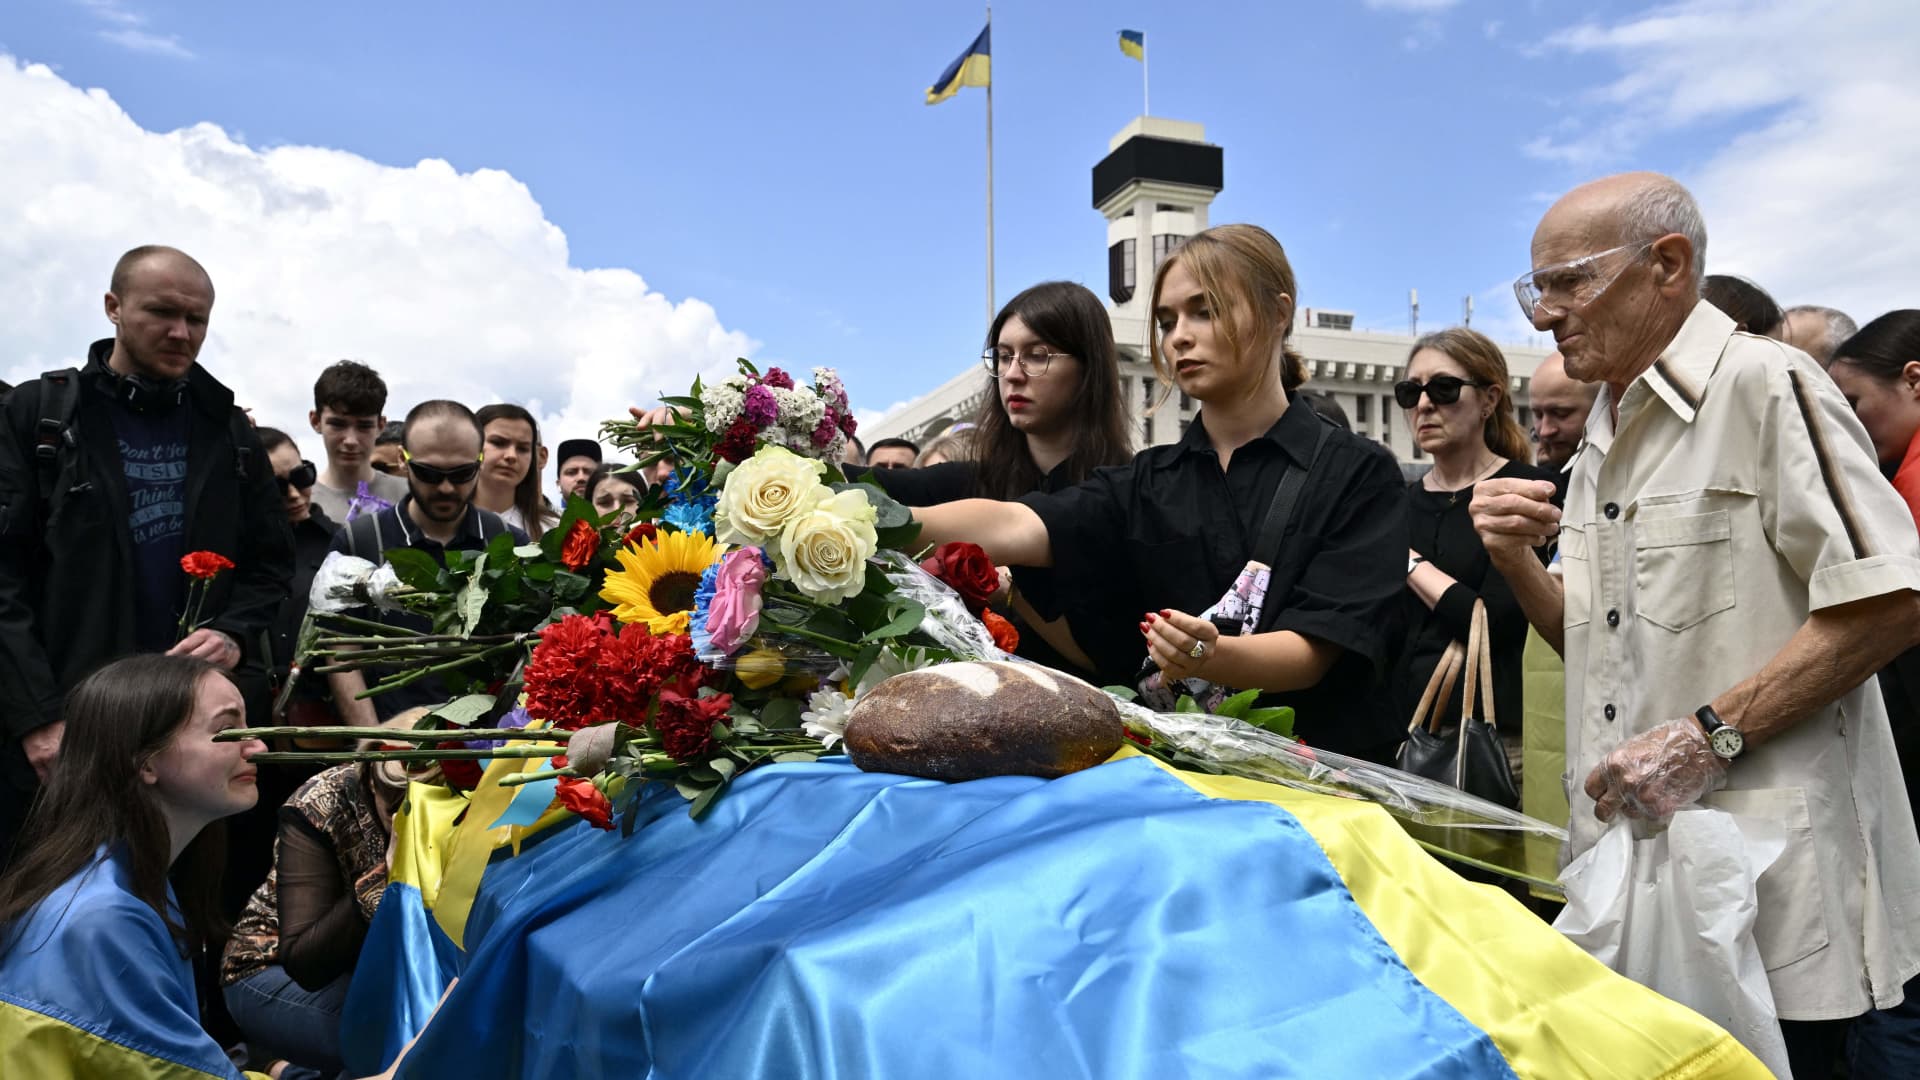 TOPSHOT - Mourners pay their respects next to the coffin of killed Ukrainian serviceman Roman Ratushny during a farewell ceremony in Kyiv on June 18, 2022, amid the Russian invasion of Ukraine. - Roman Ratushny was a leading figure of Ukraine's pro-European Maidan movement, an anti-corruption activist, and fought Russian forces with the Ukrainian army. Roman Ratushny died on June 9 near Izium, in the Kharkiv region, where Ukrainian forces are confronting the Russian army.at the age of 24. (Photo by Genya SAVILOV / AFP) (Photo by GENYA SAVILOV/AFP via Getty Images)